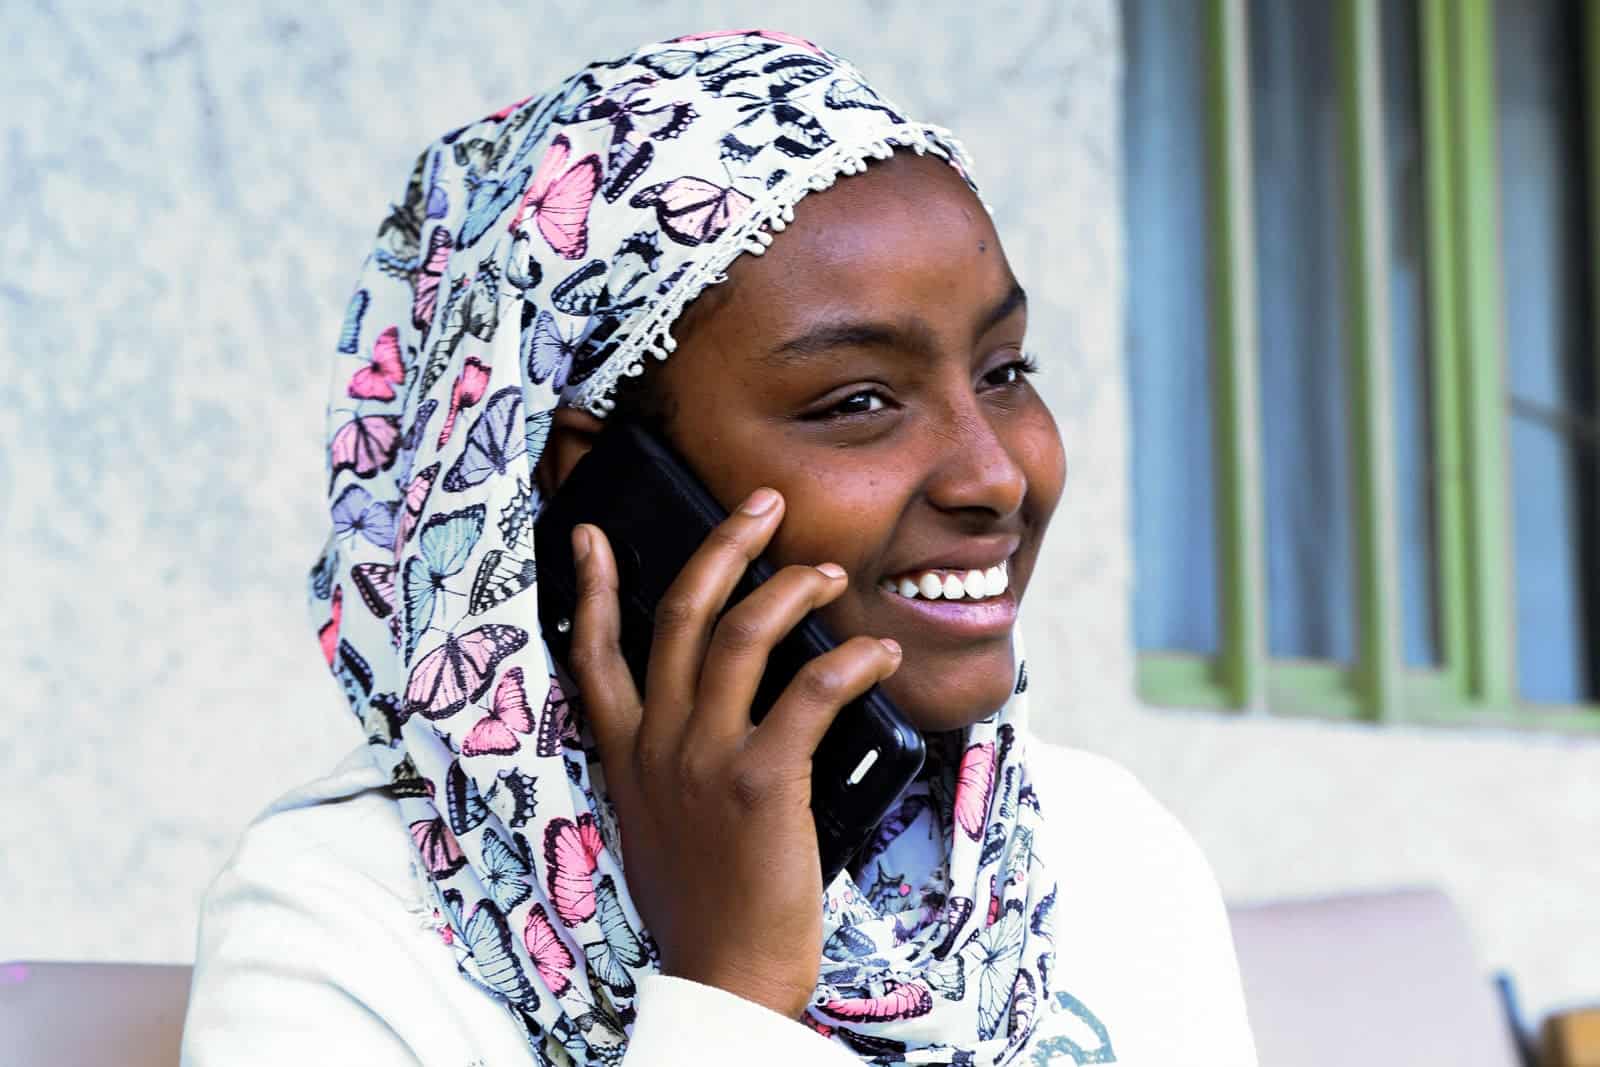 Woman wearing a white shirt and a floral print head covering. She is sitting outside and is talking on the phone.